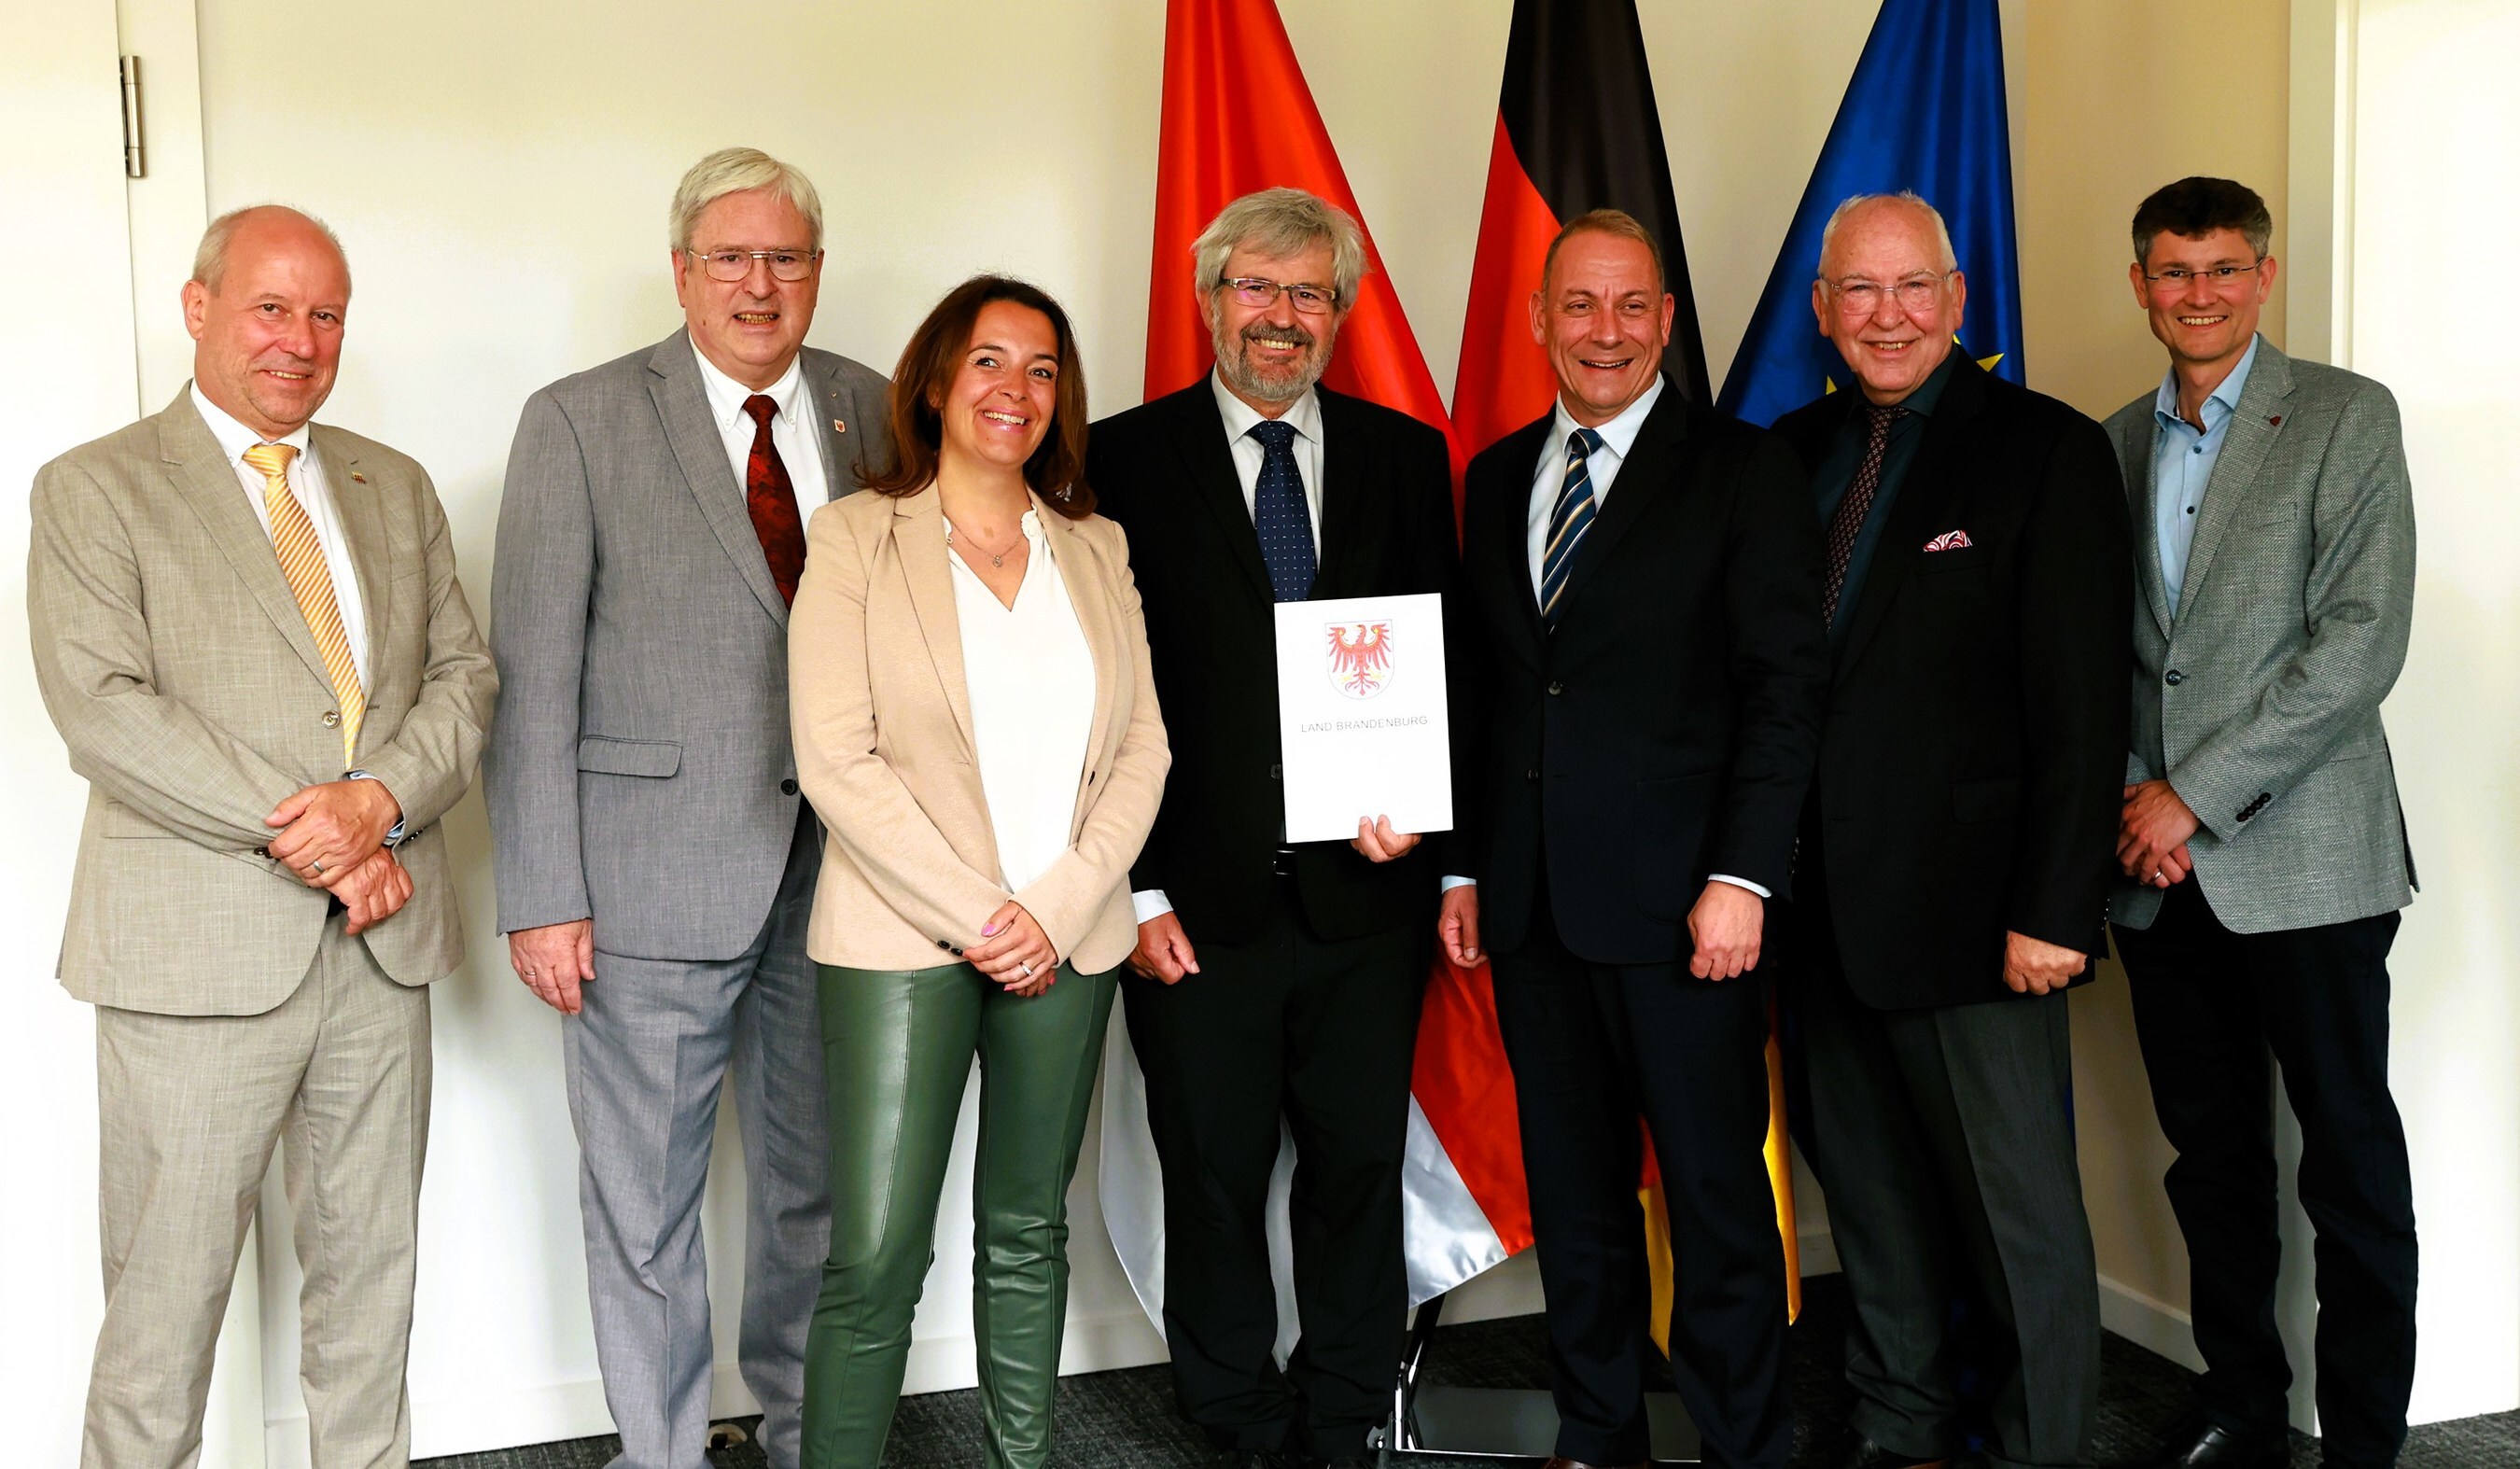 Brandenburg Officials and members of the Rock Tech team during the permit handover. Credits: Volker Tanner, Staatskanzlei (CNW Group/Rock Tech Lithium Inc.)